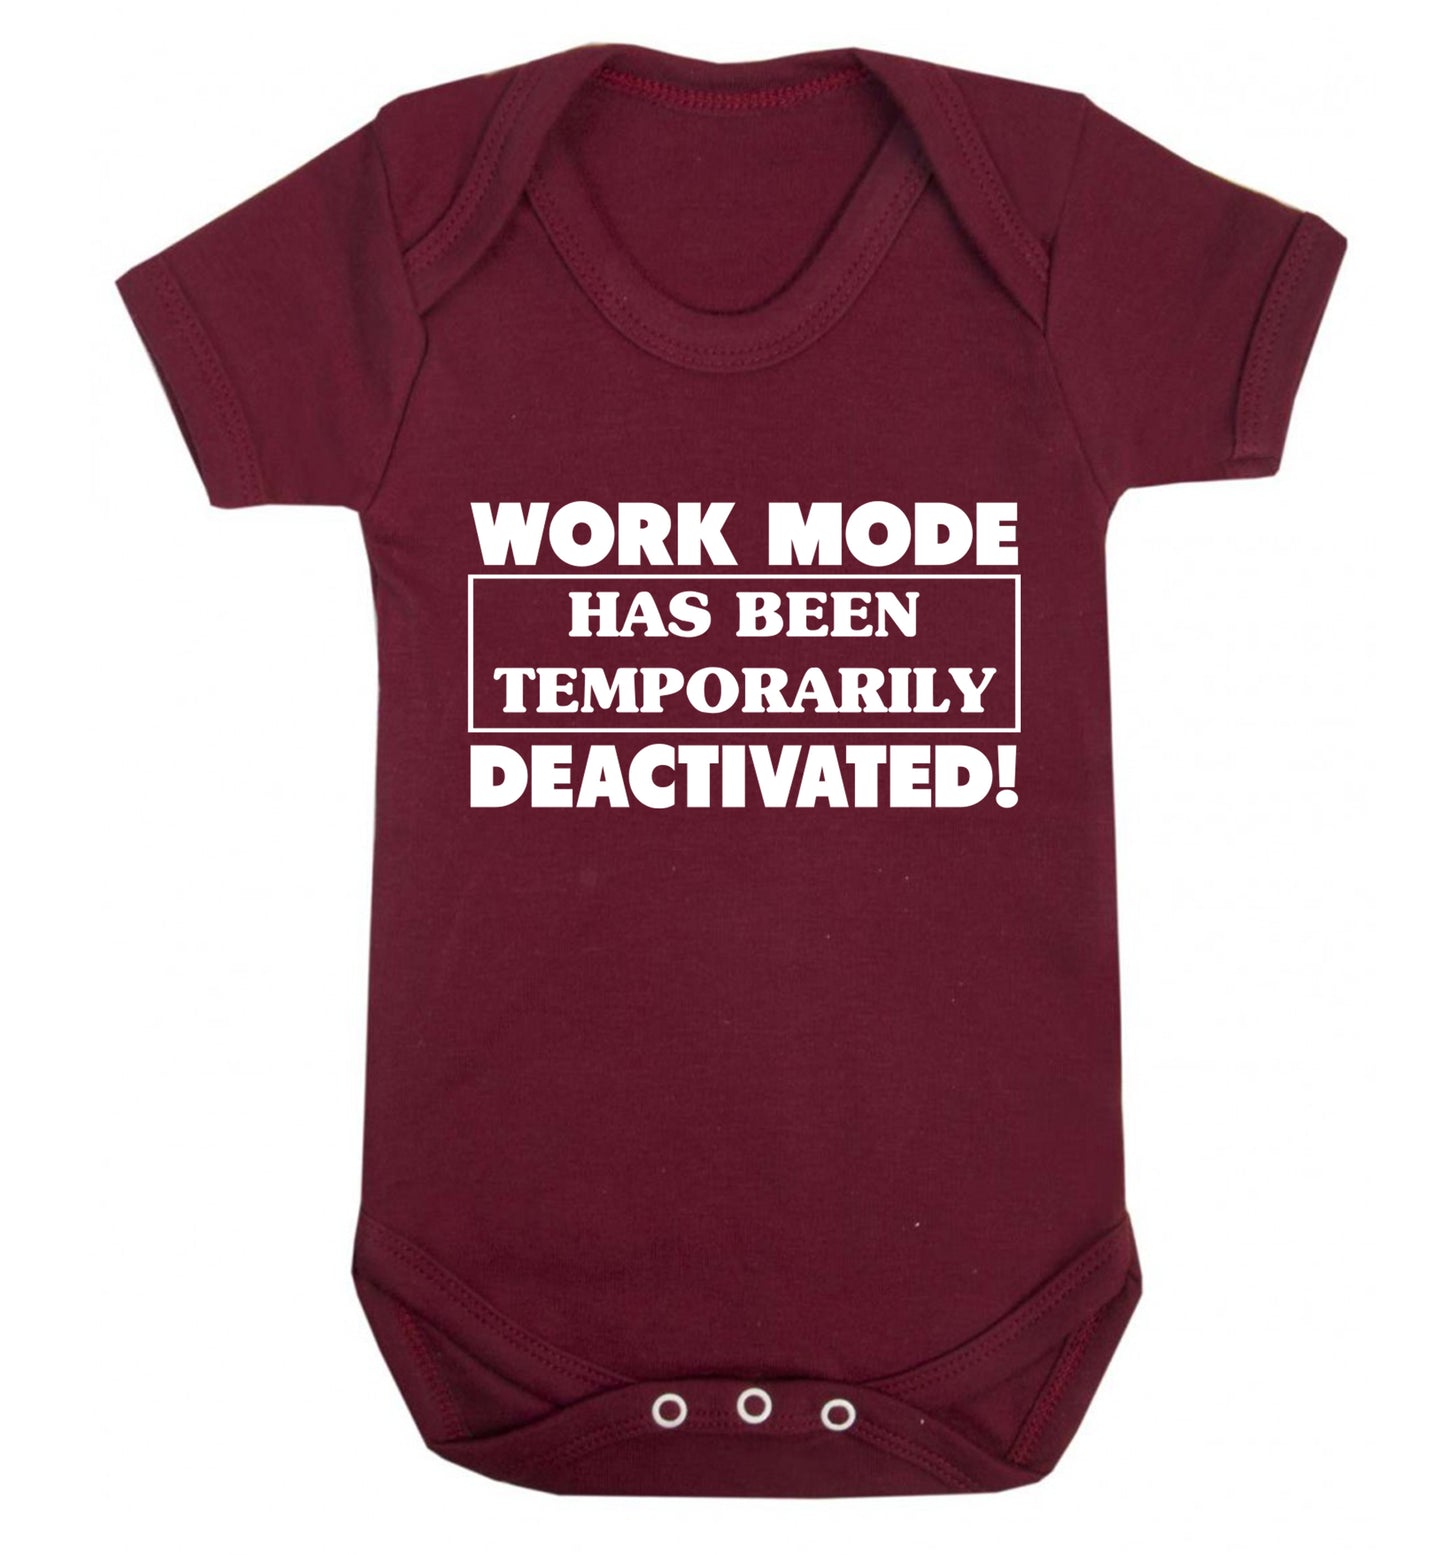 Work mode has now been temporarily deactivated Baby Vest maroon 18-24 months